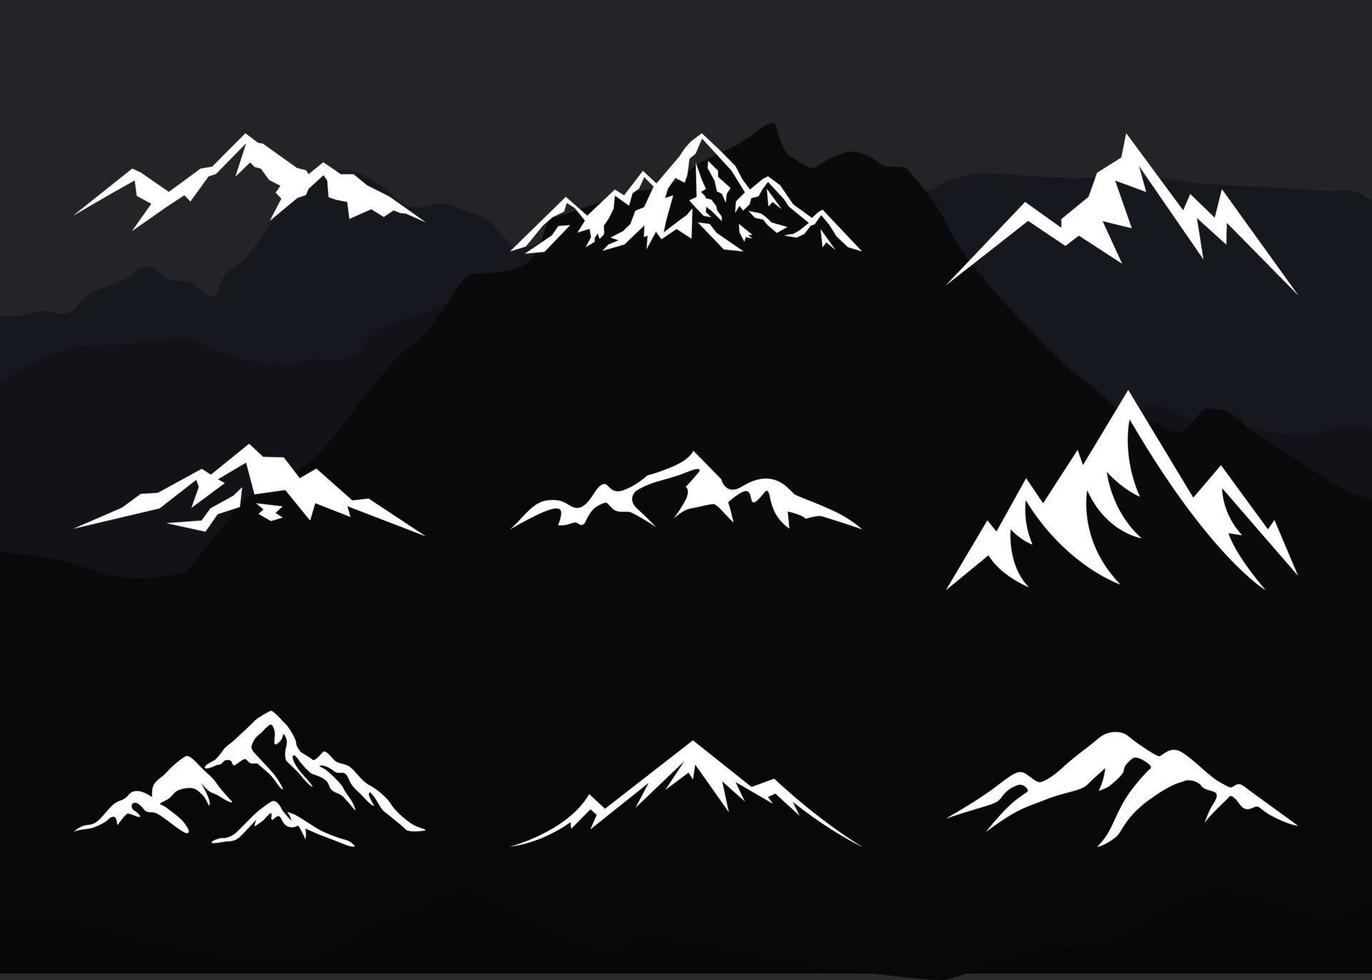 nine mountains group in high detailed silhouette vector